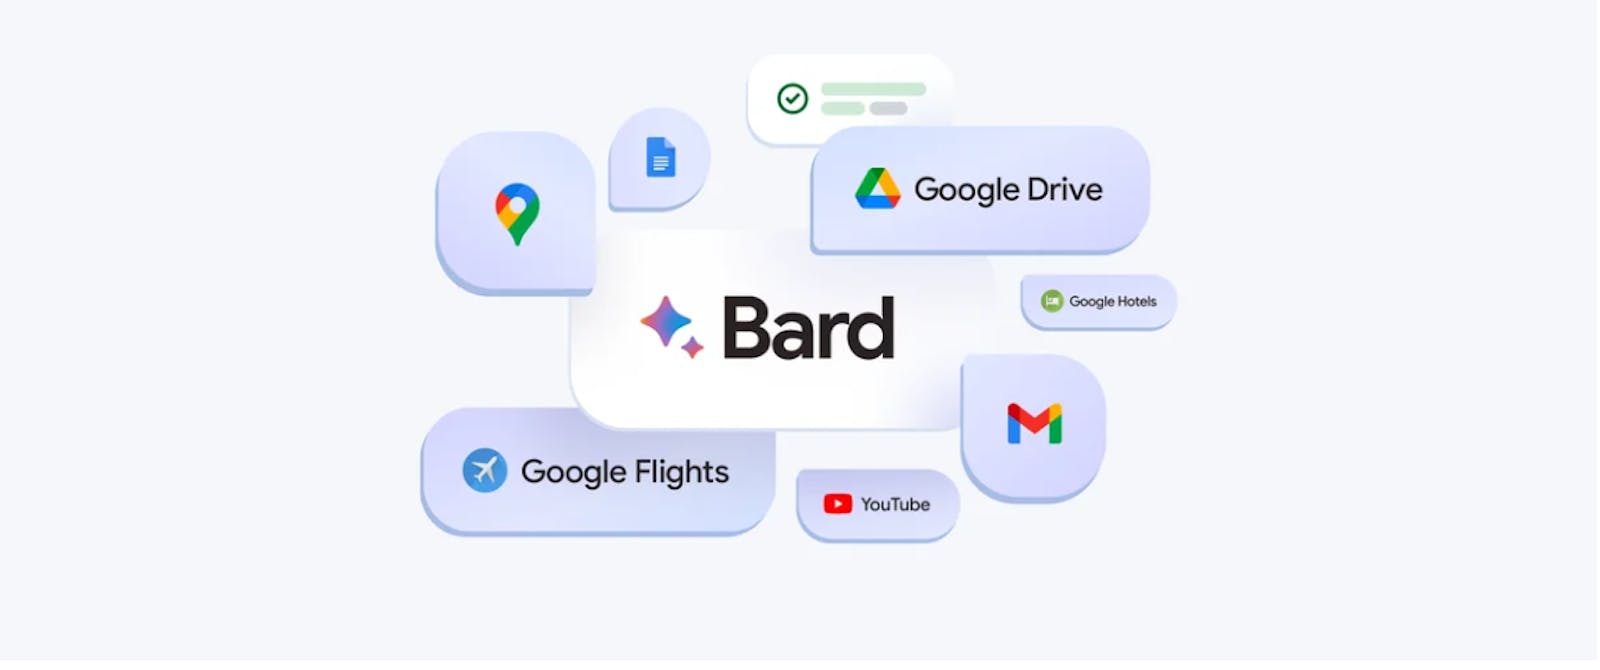 Bard's Big Update: Google Integrates AI with Google Apps